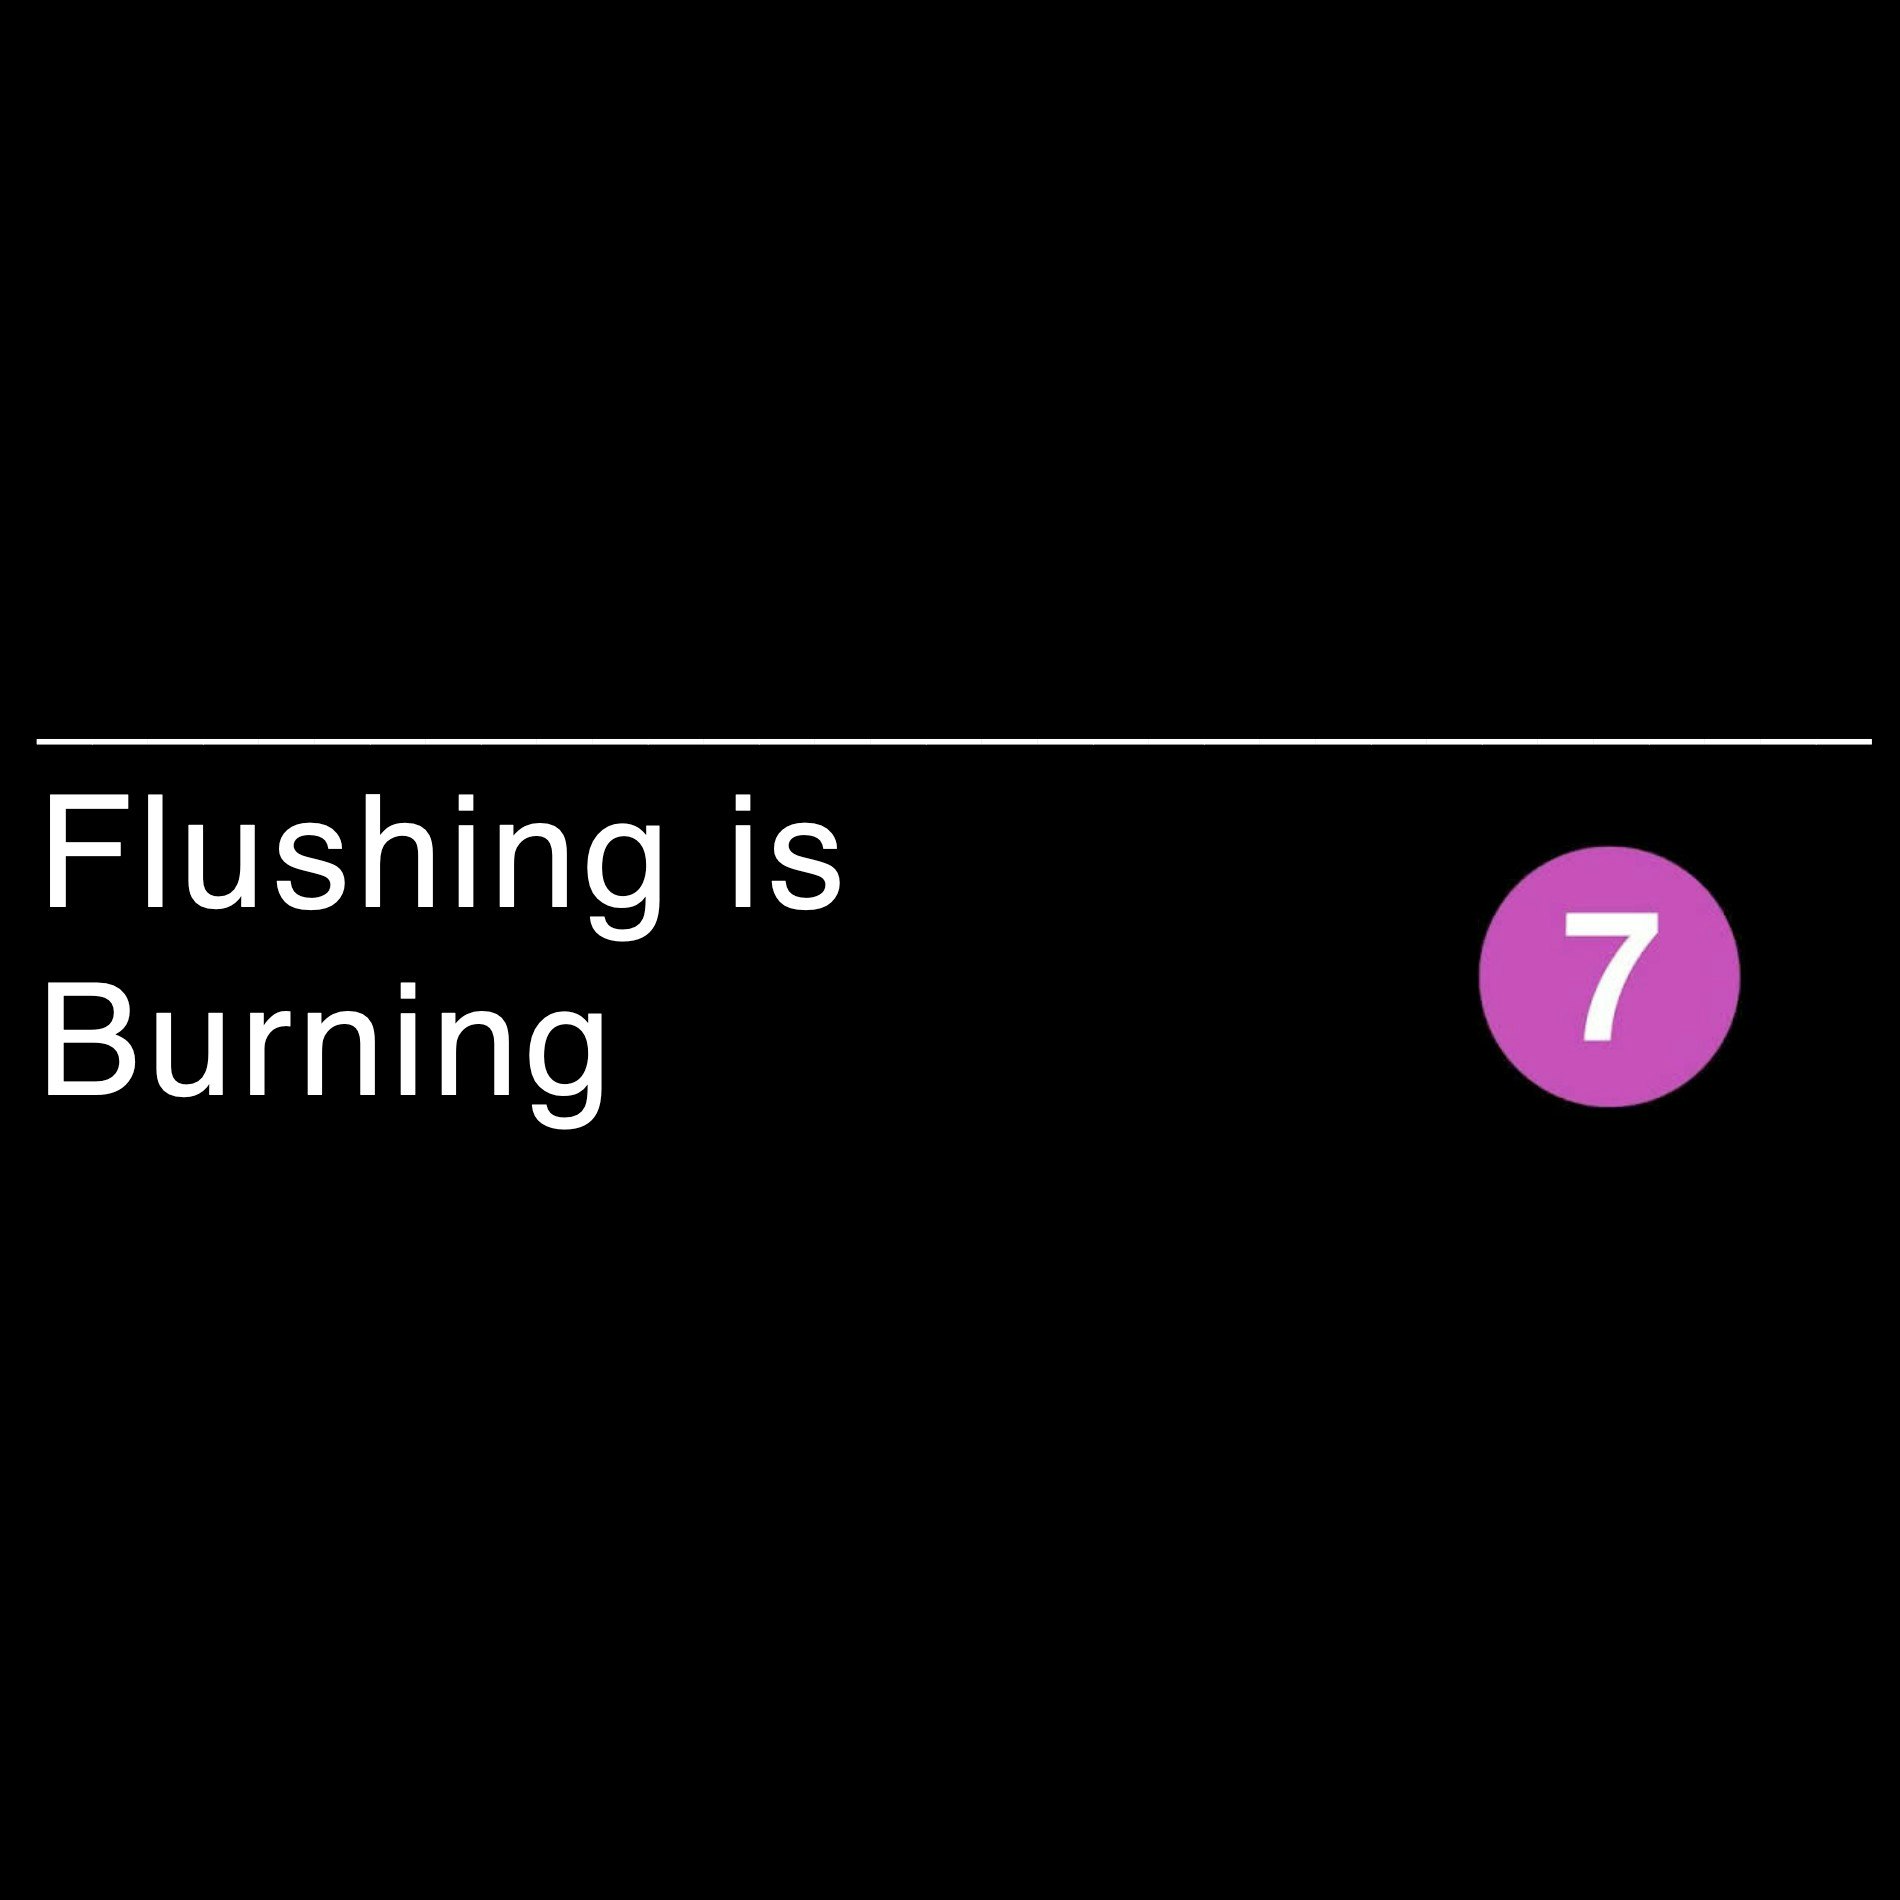 Flushing is Burning: The Worst of Times